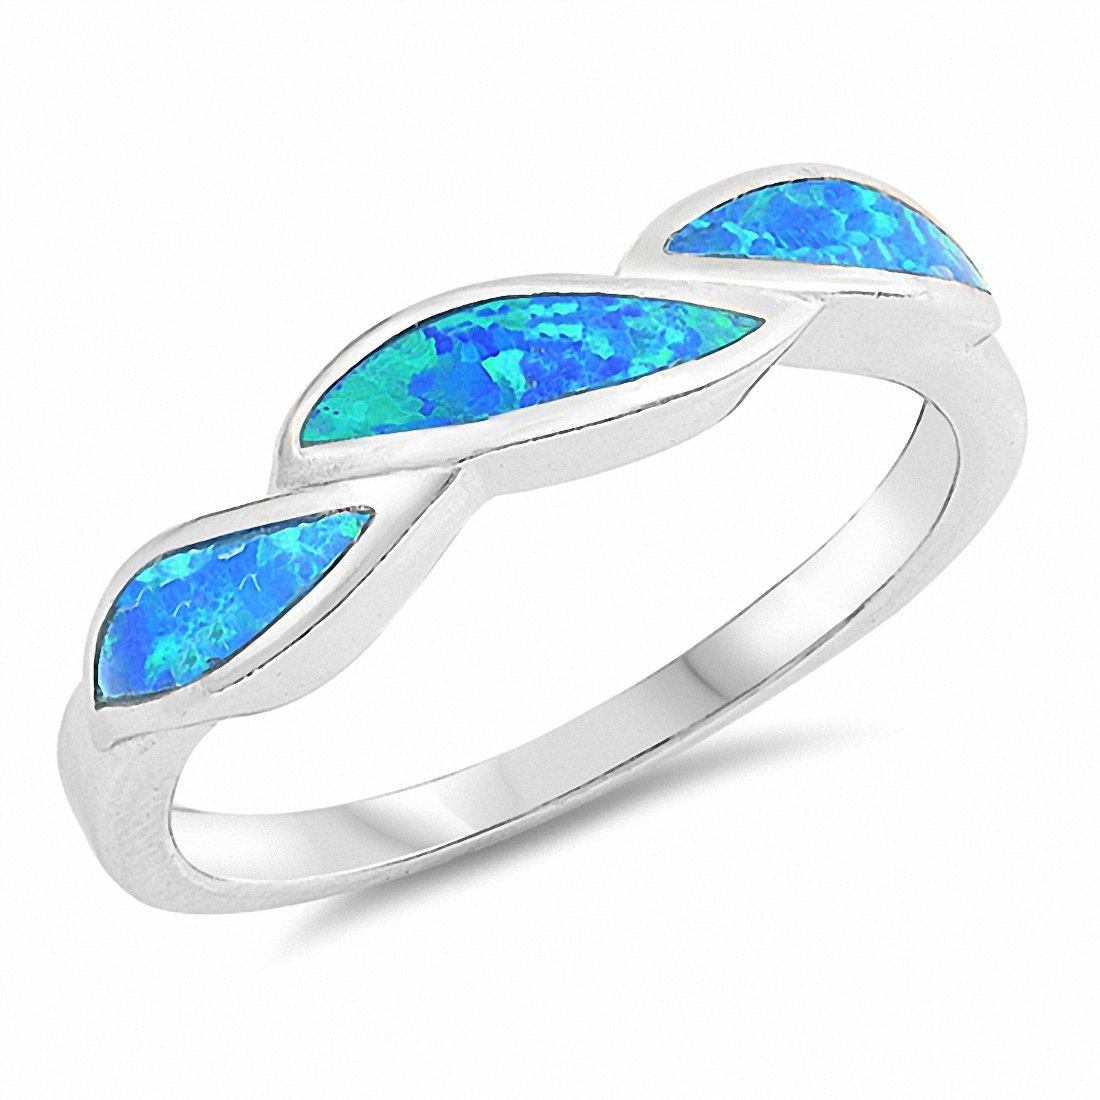 Fashion Band Silver Ring Lab Created Opal 925 Sterling Silver